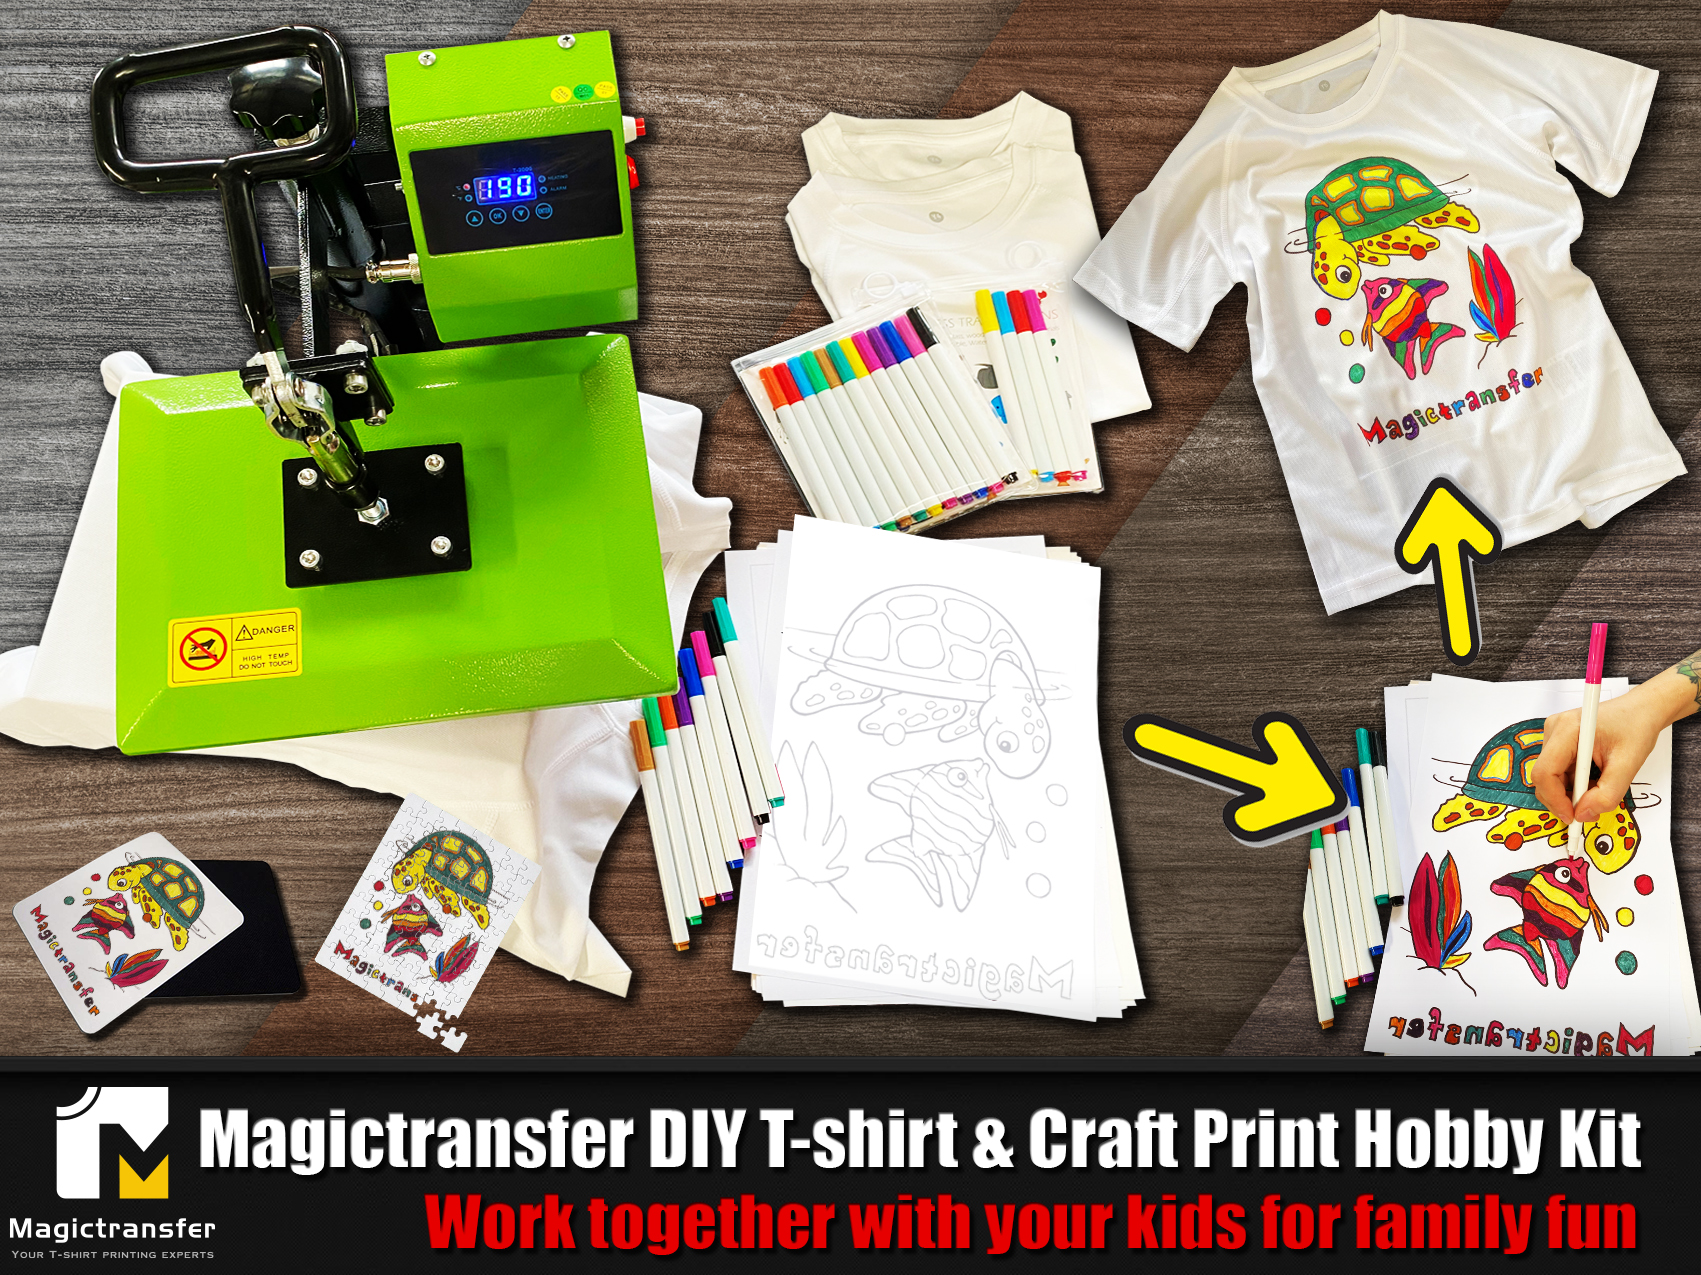 T-shirt Crafting: Creative Ideas for Moms and Tweens or Teens